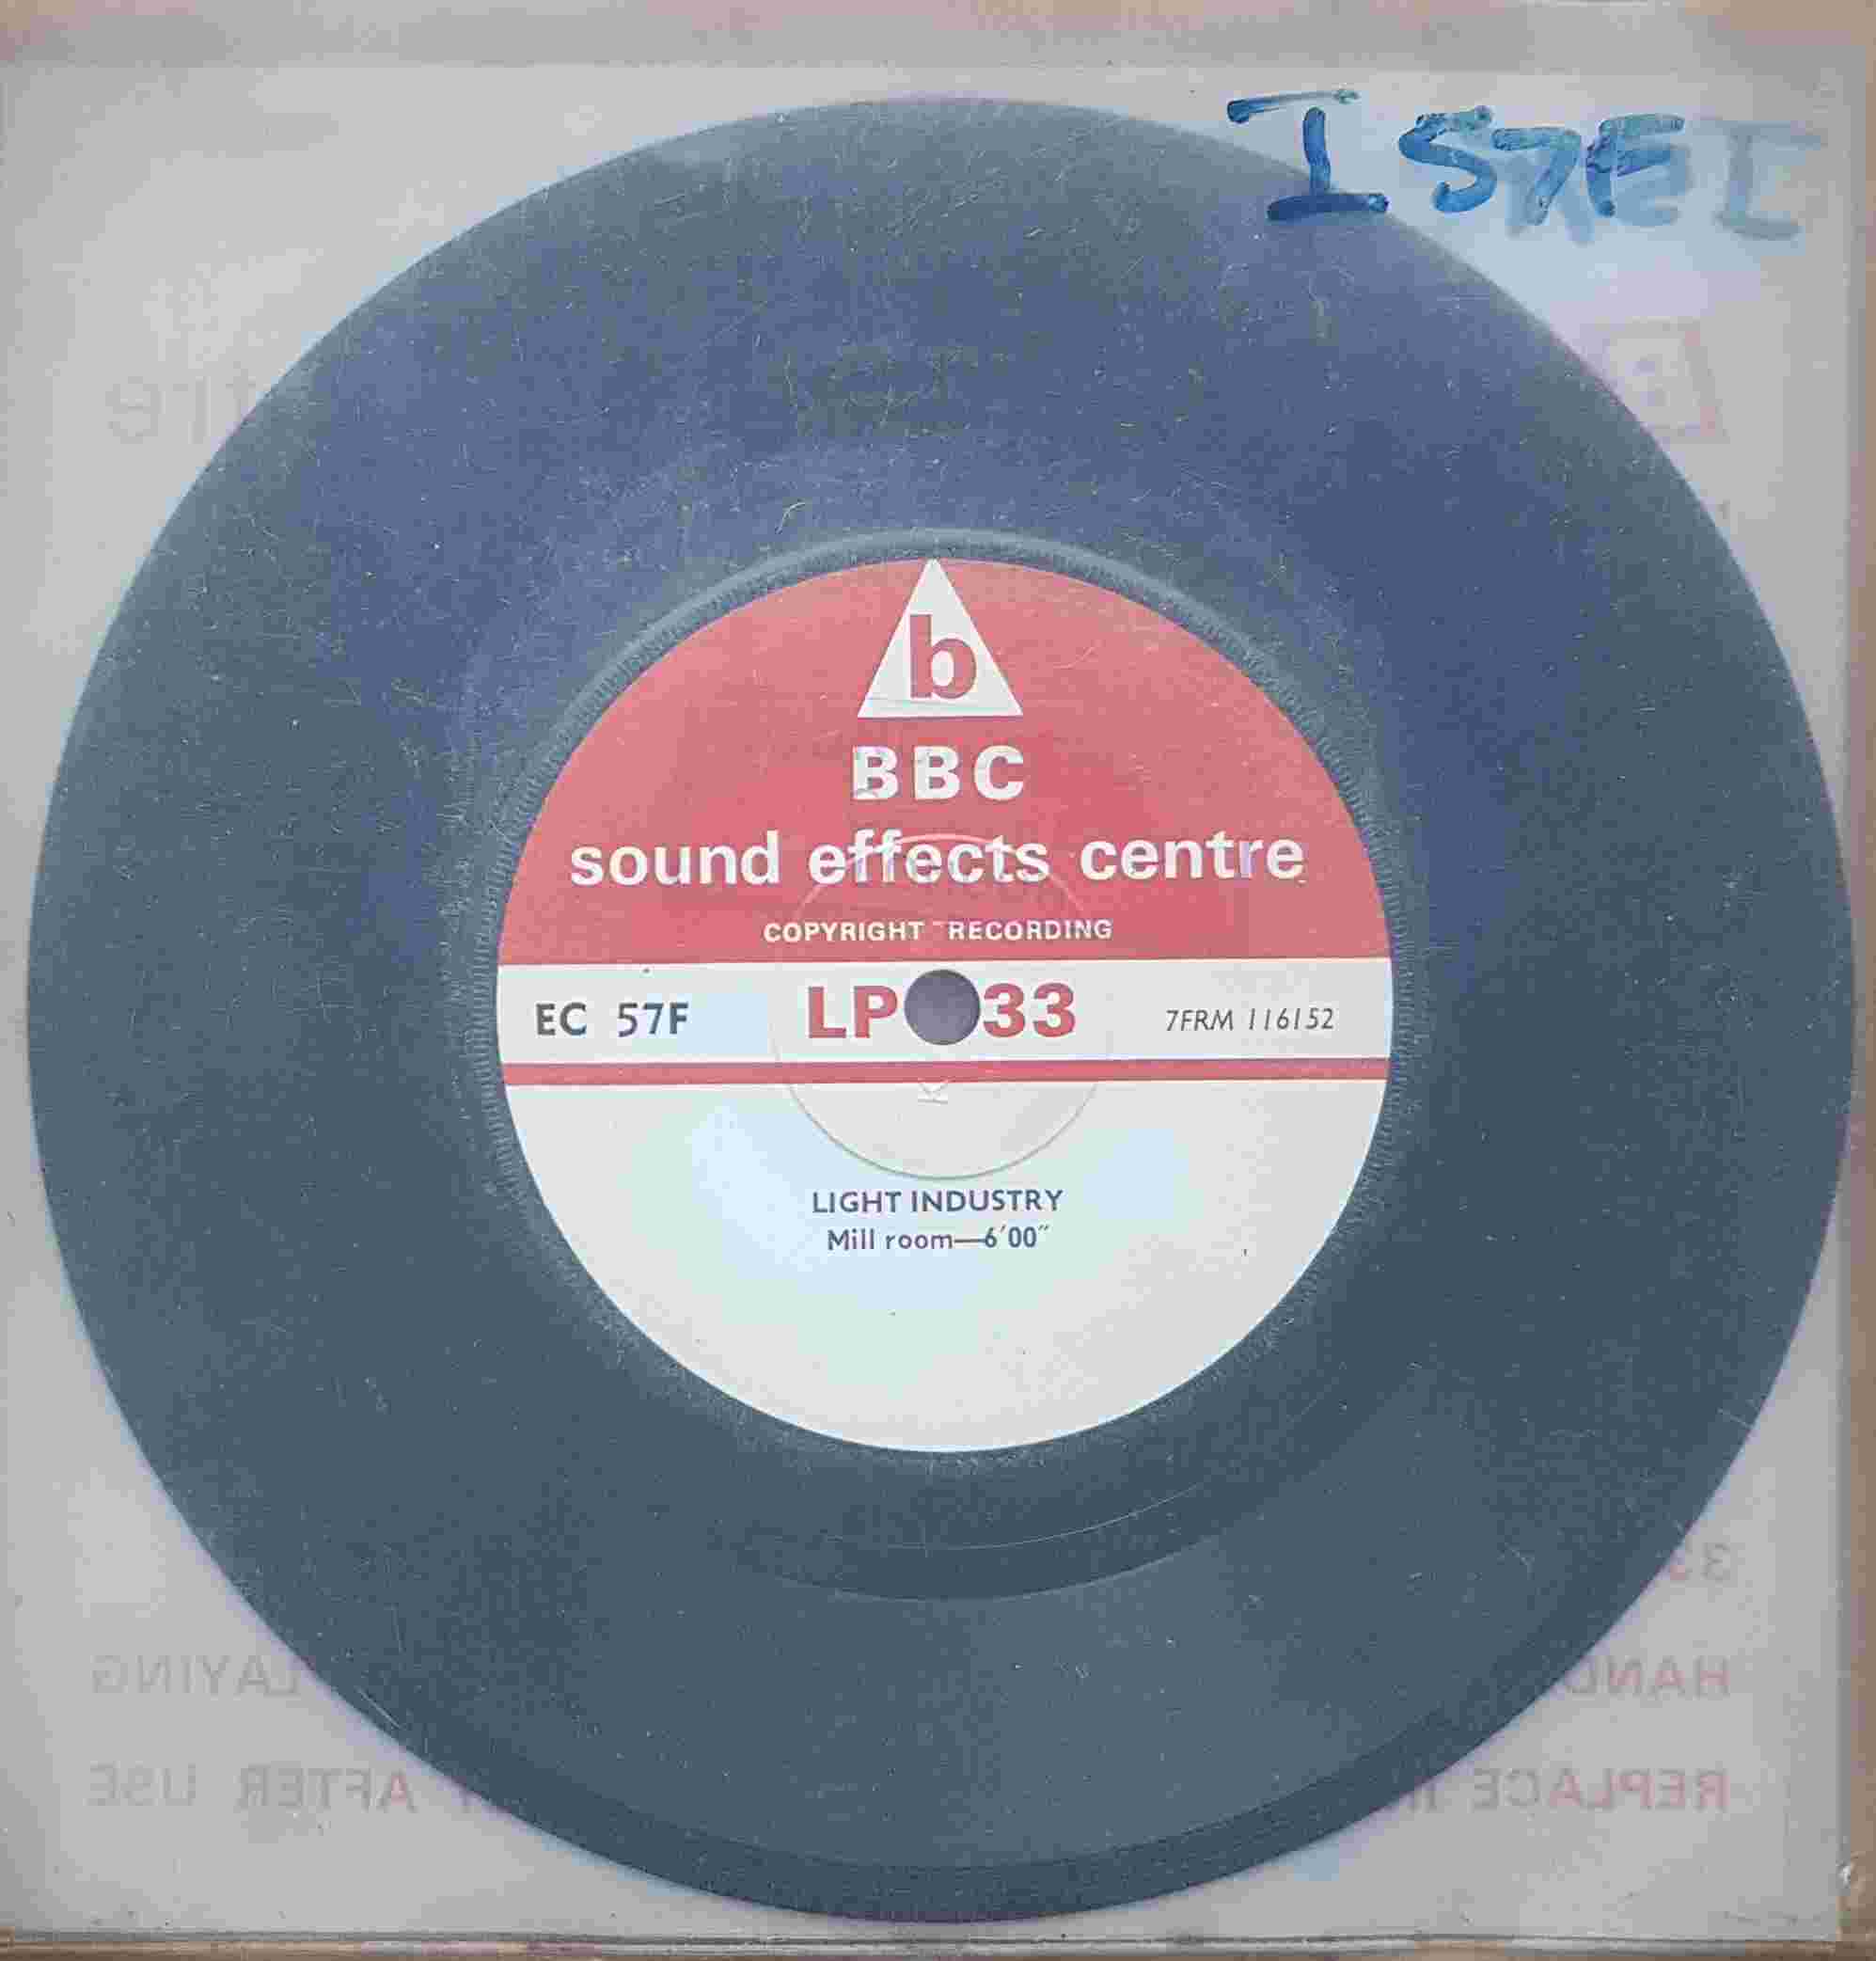 Picture of EC 57F Light industry by artist Not registered from the BBC records and Tapes library